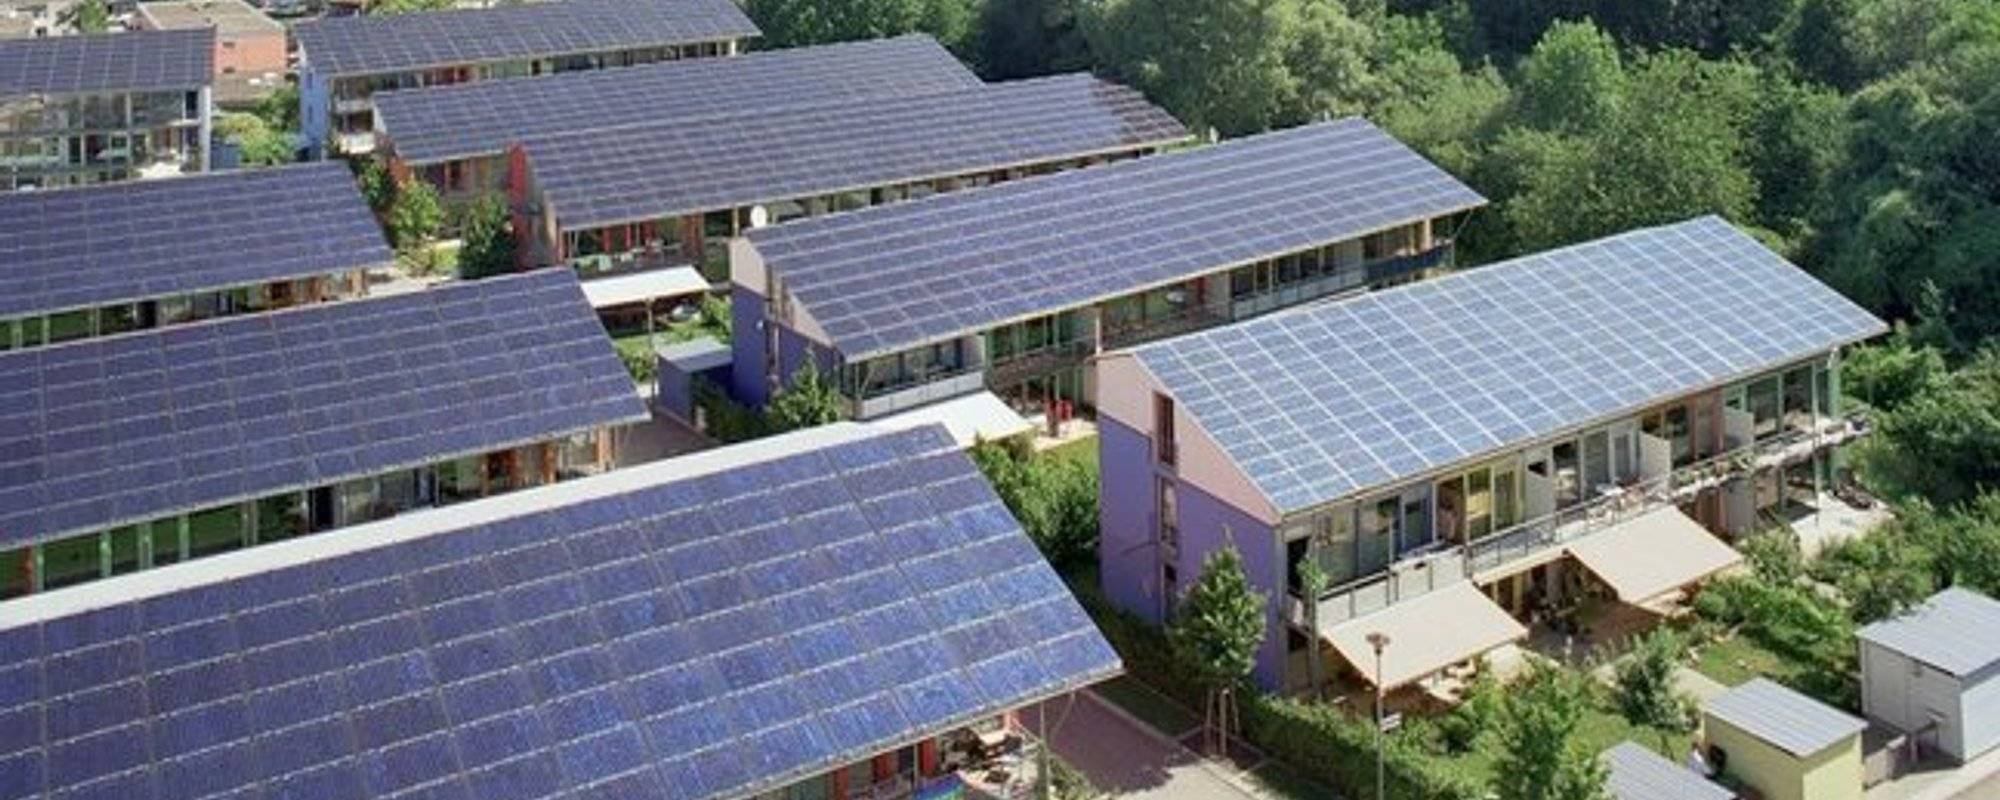 Vauban, Germany - The worlds first sustainable living suburb